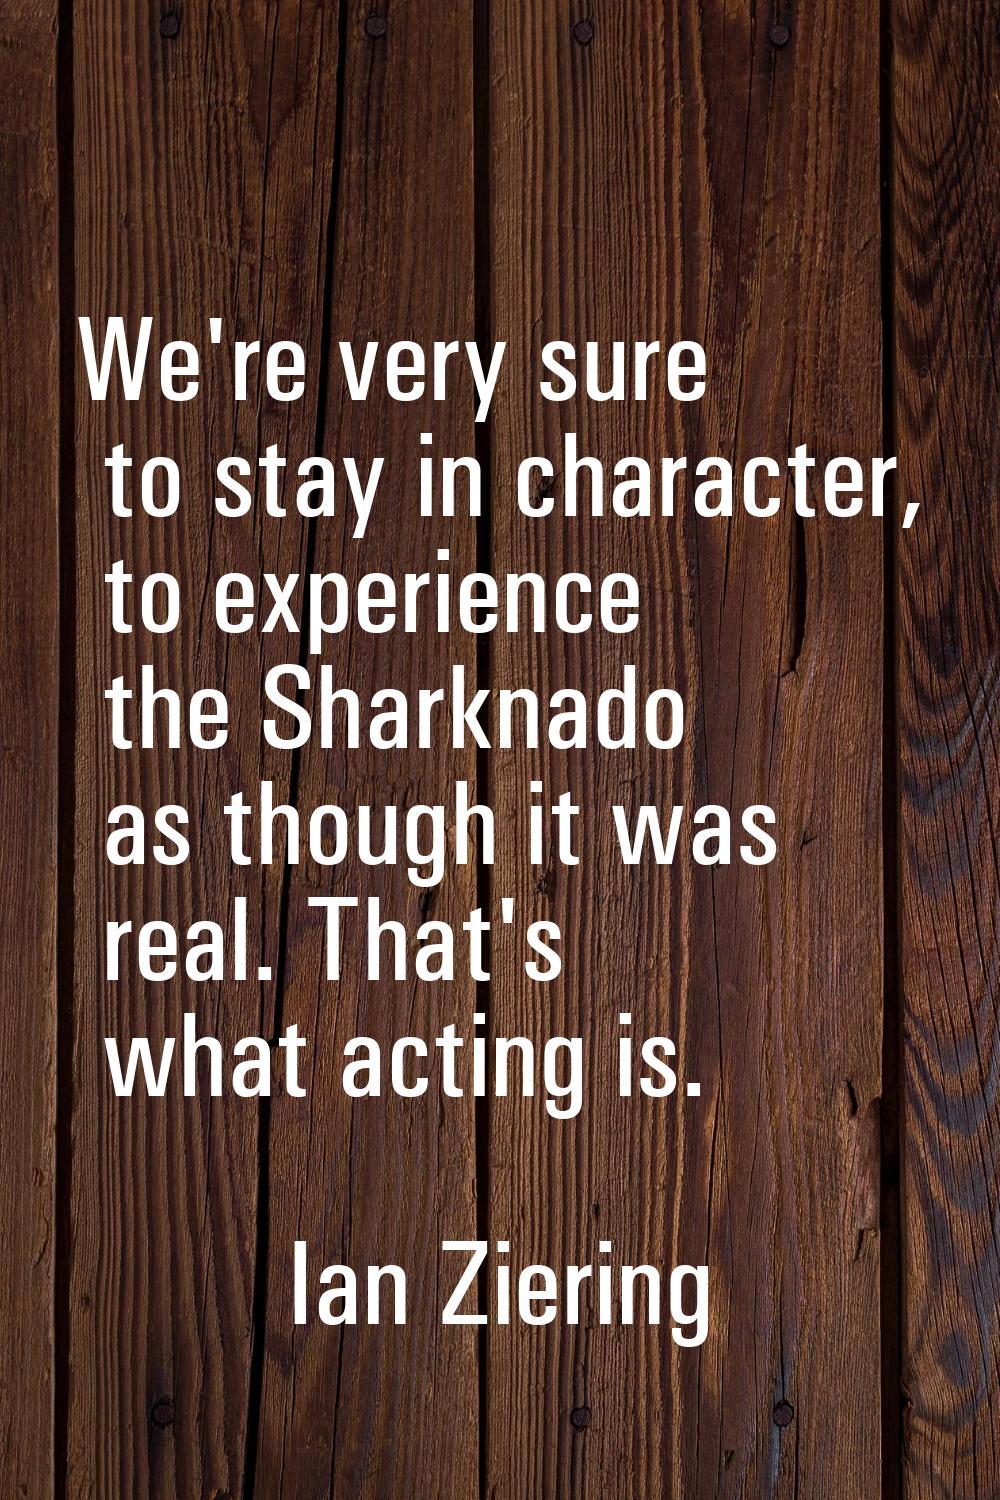 We're very sure to stay in character, to experience the Sharknado as though it was real. That's wha